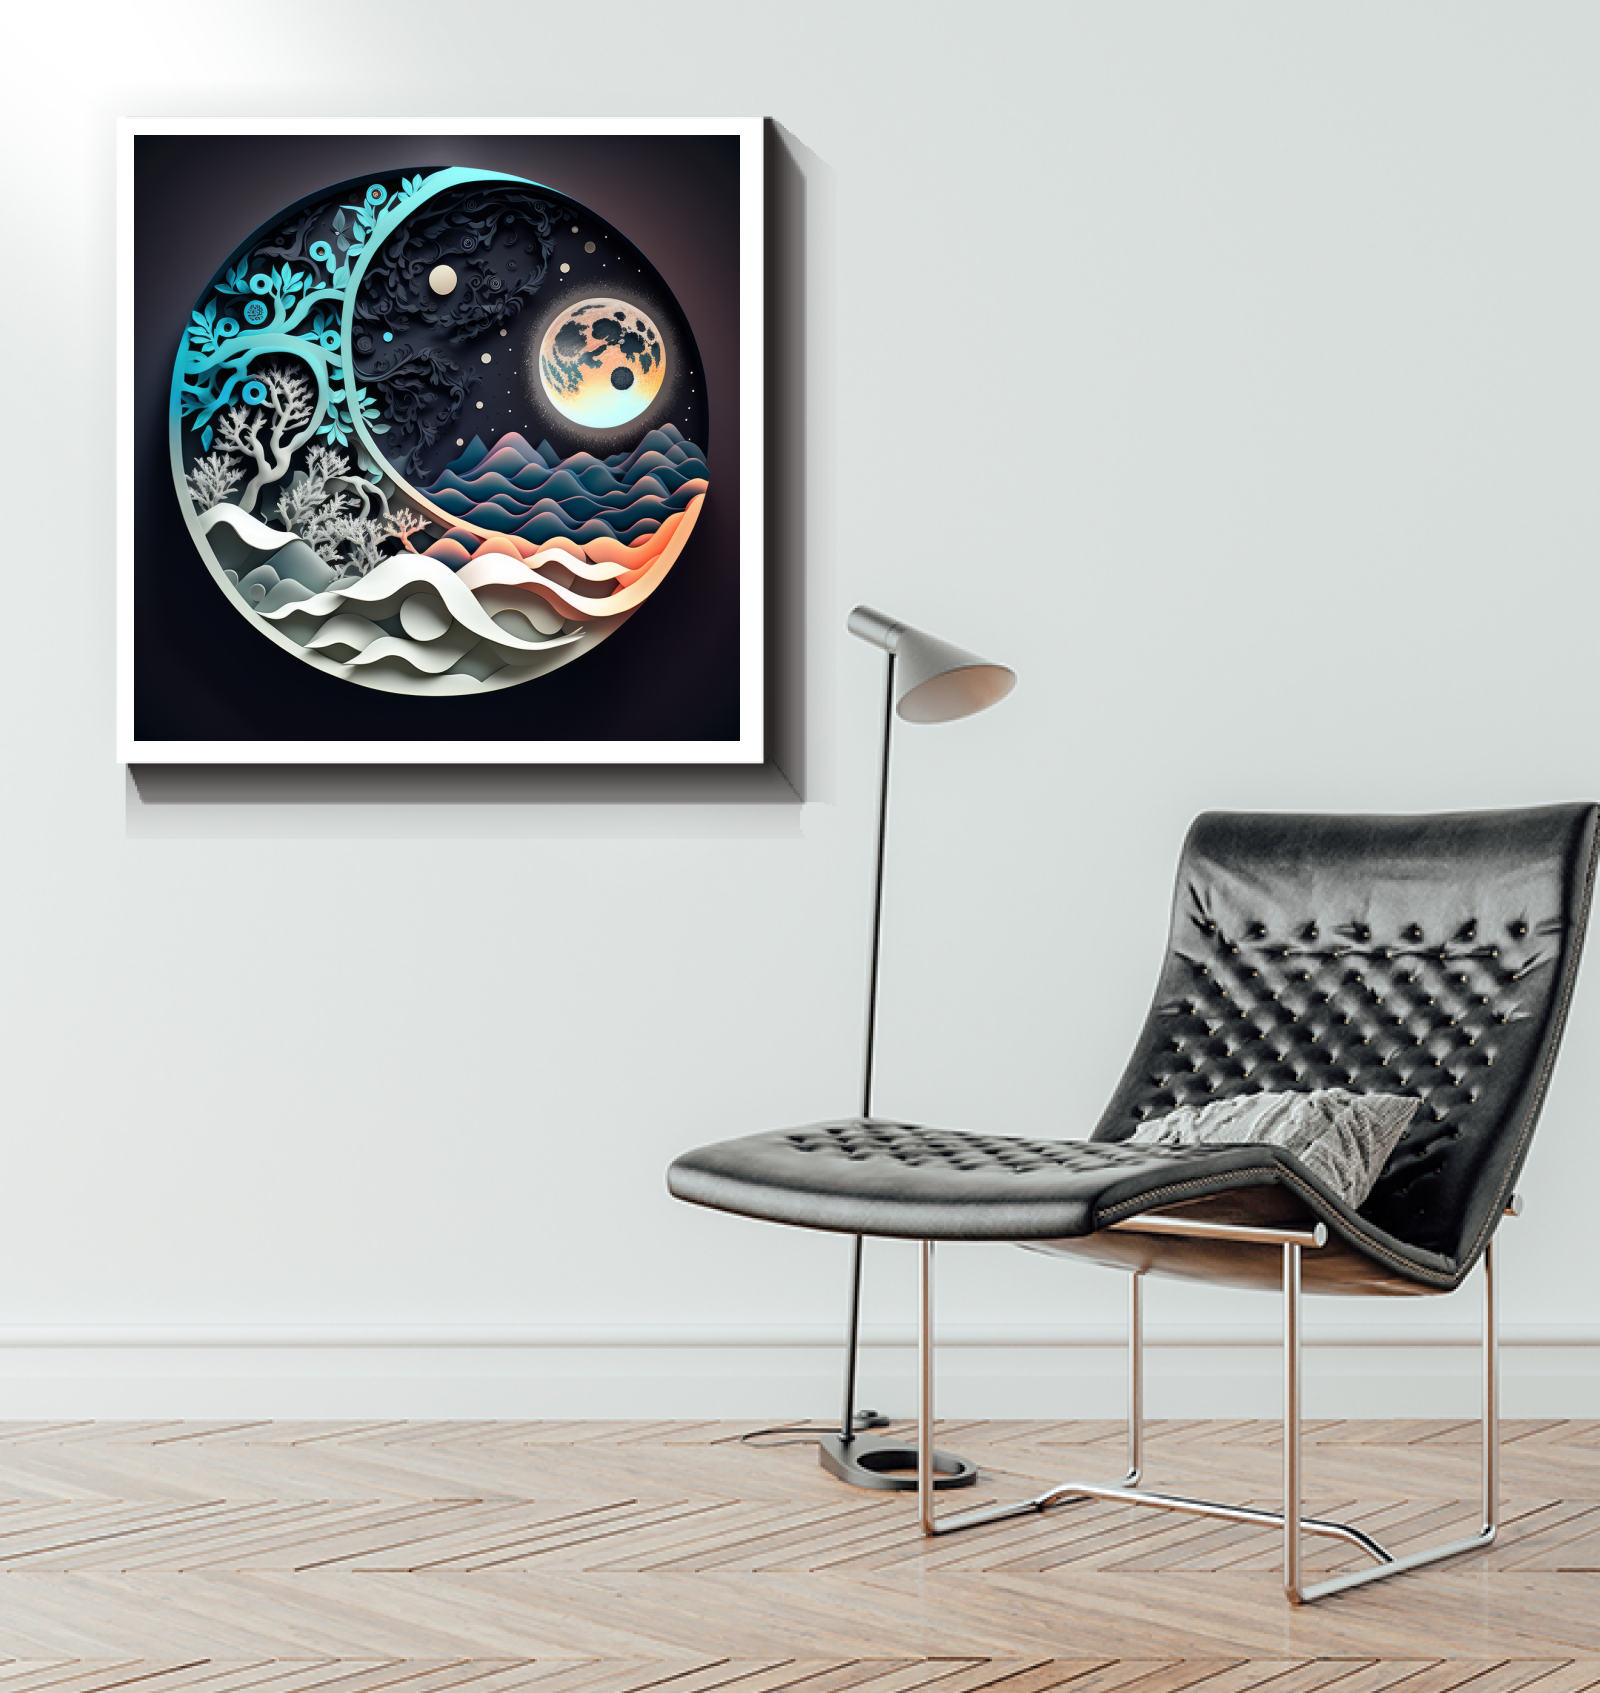 Wrapped canvas with shimmering and dark artistic elements.